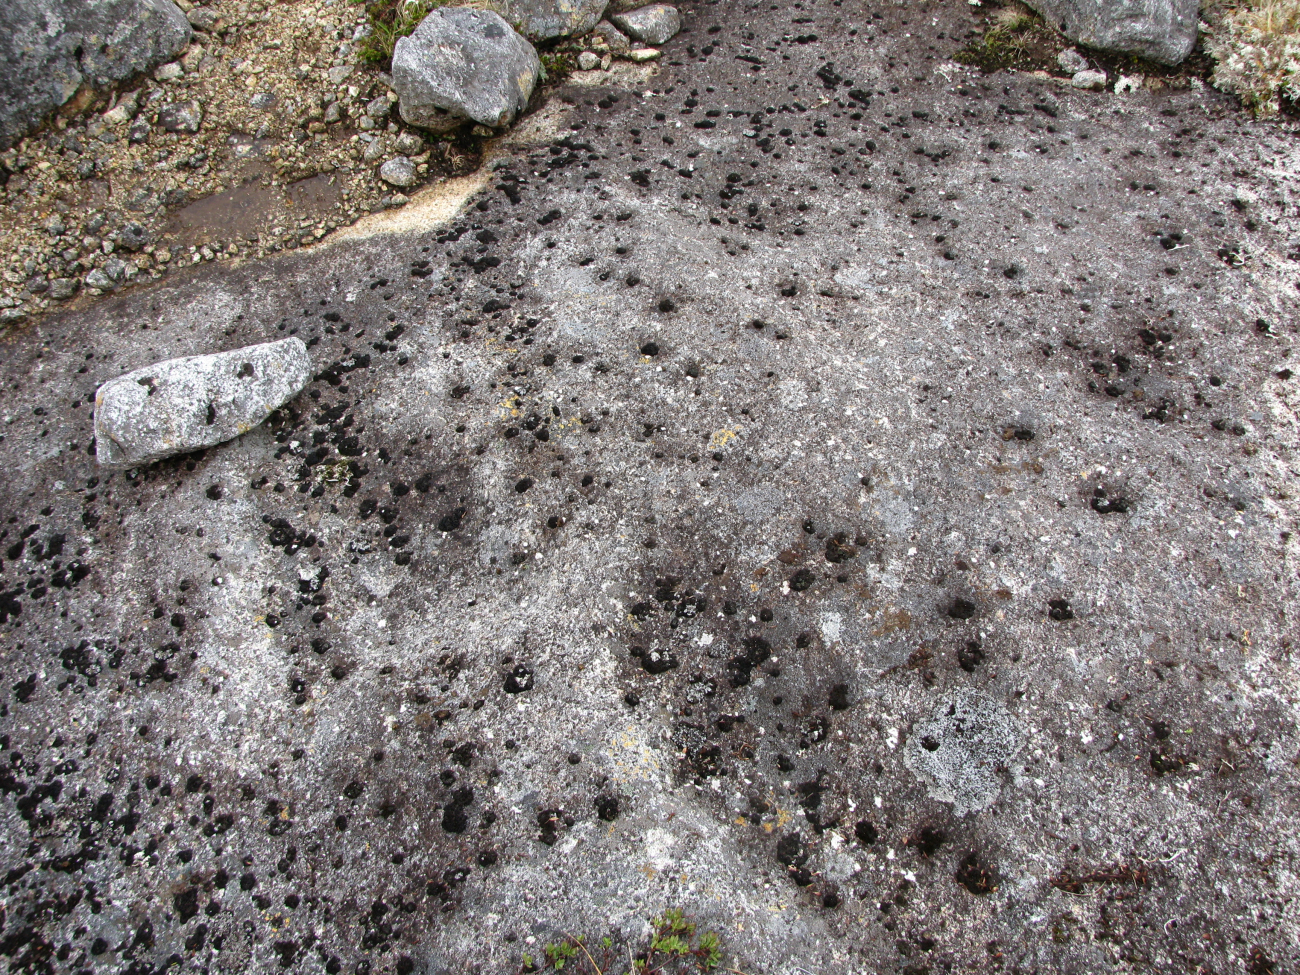 Like randomly tossed blobs of oil, black lichens have colonized an exposedLittle Koniuji Island rock outcrop